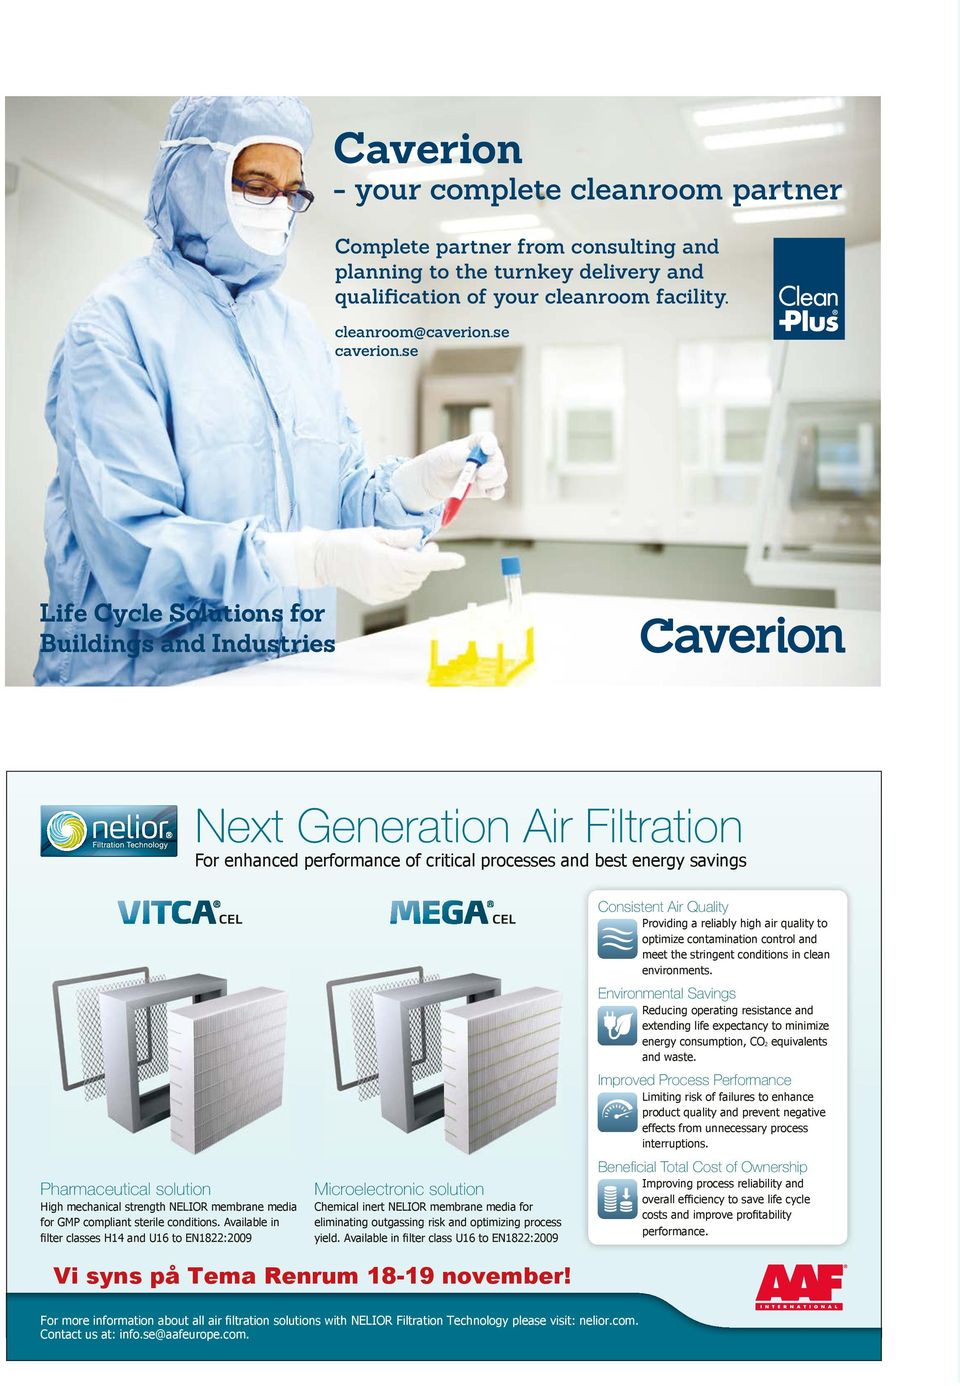 high air quality to optimize contamination control and meet the stringent conditions in clean environments.